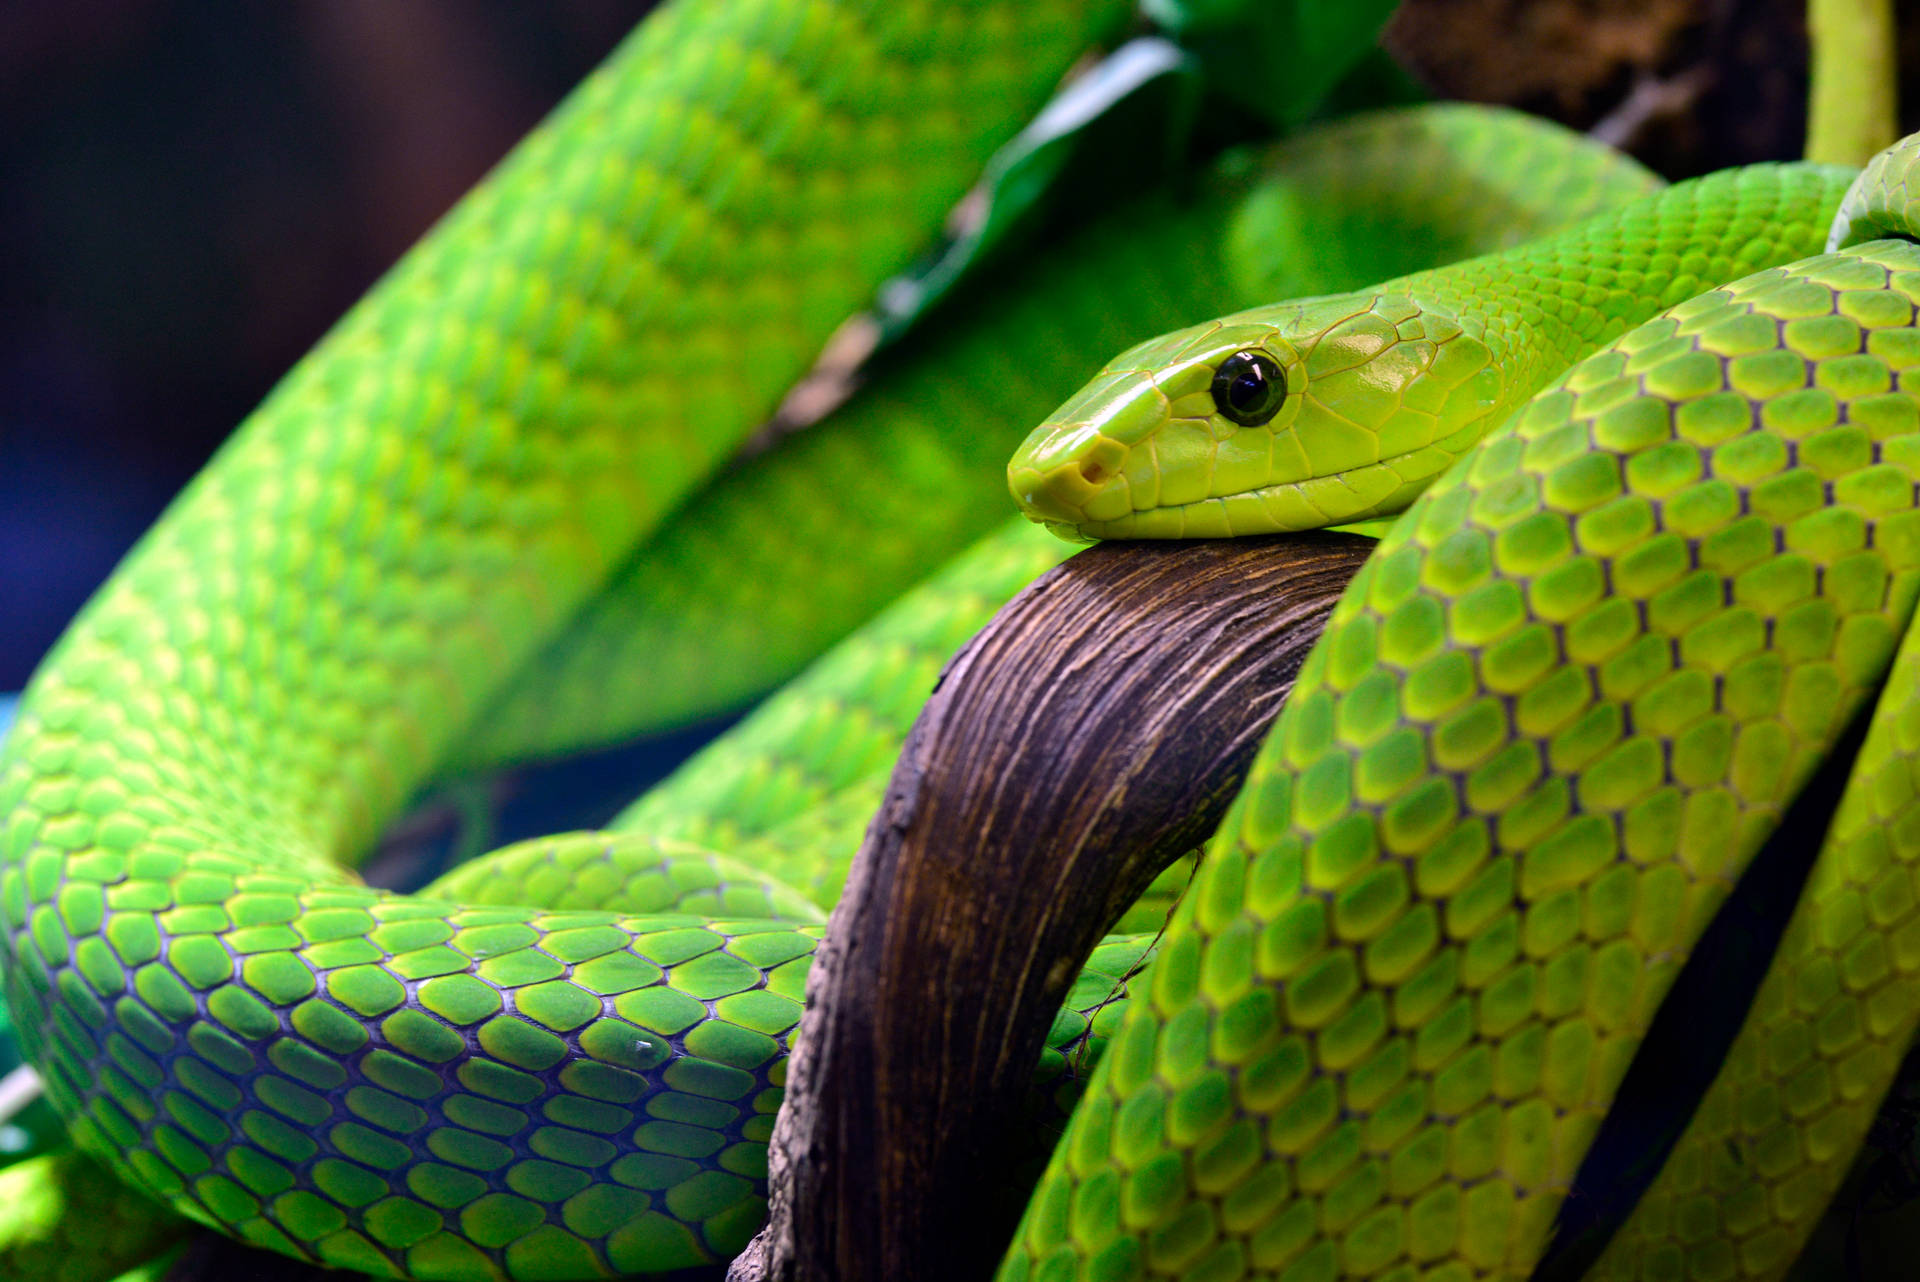 Snake 6016X4016 Wallpaper and Background Image